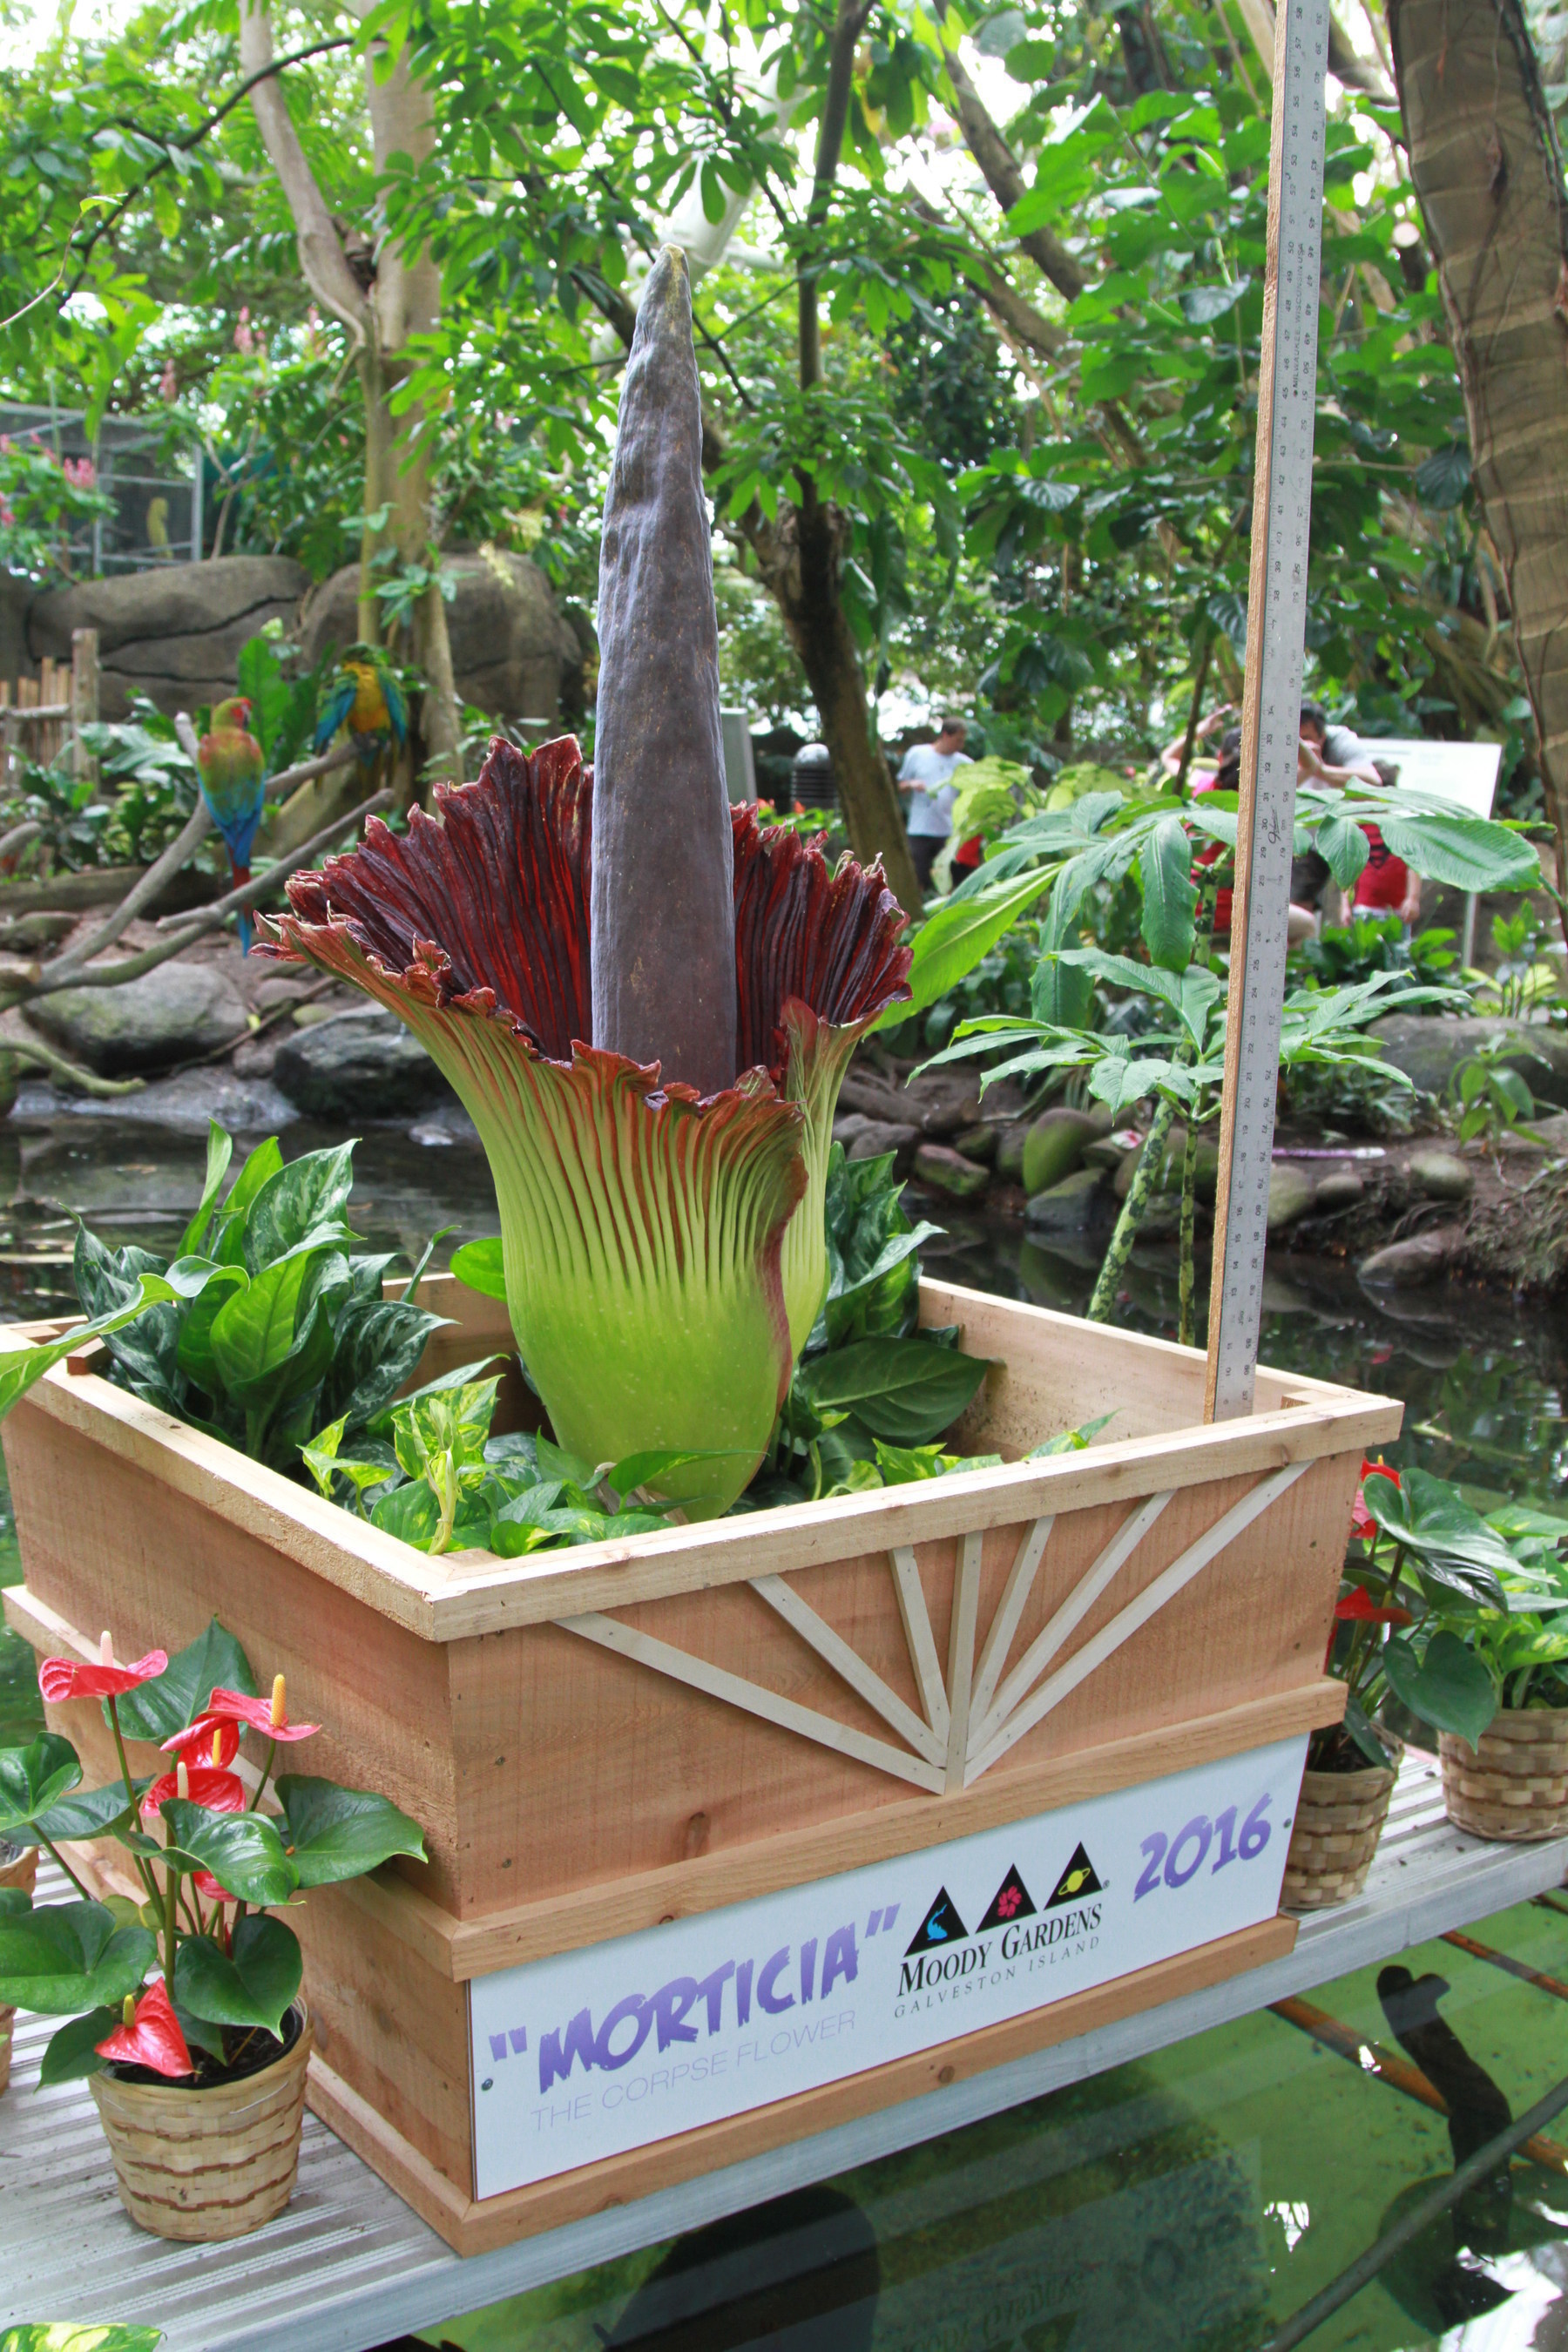 Moody Gardens Corpse Flower "Morticia" opened Saturday afternoon in Galveston, TX. She is beautiful and breahtaking in more ways than one, emitting an odor that smells like rotting flesh.